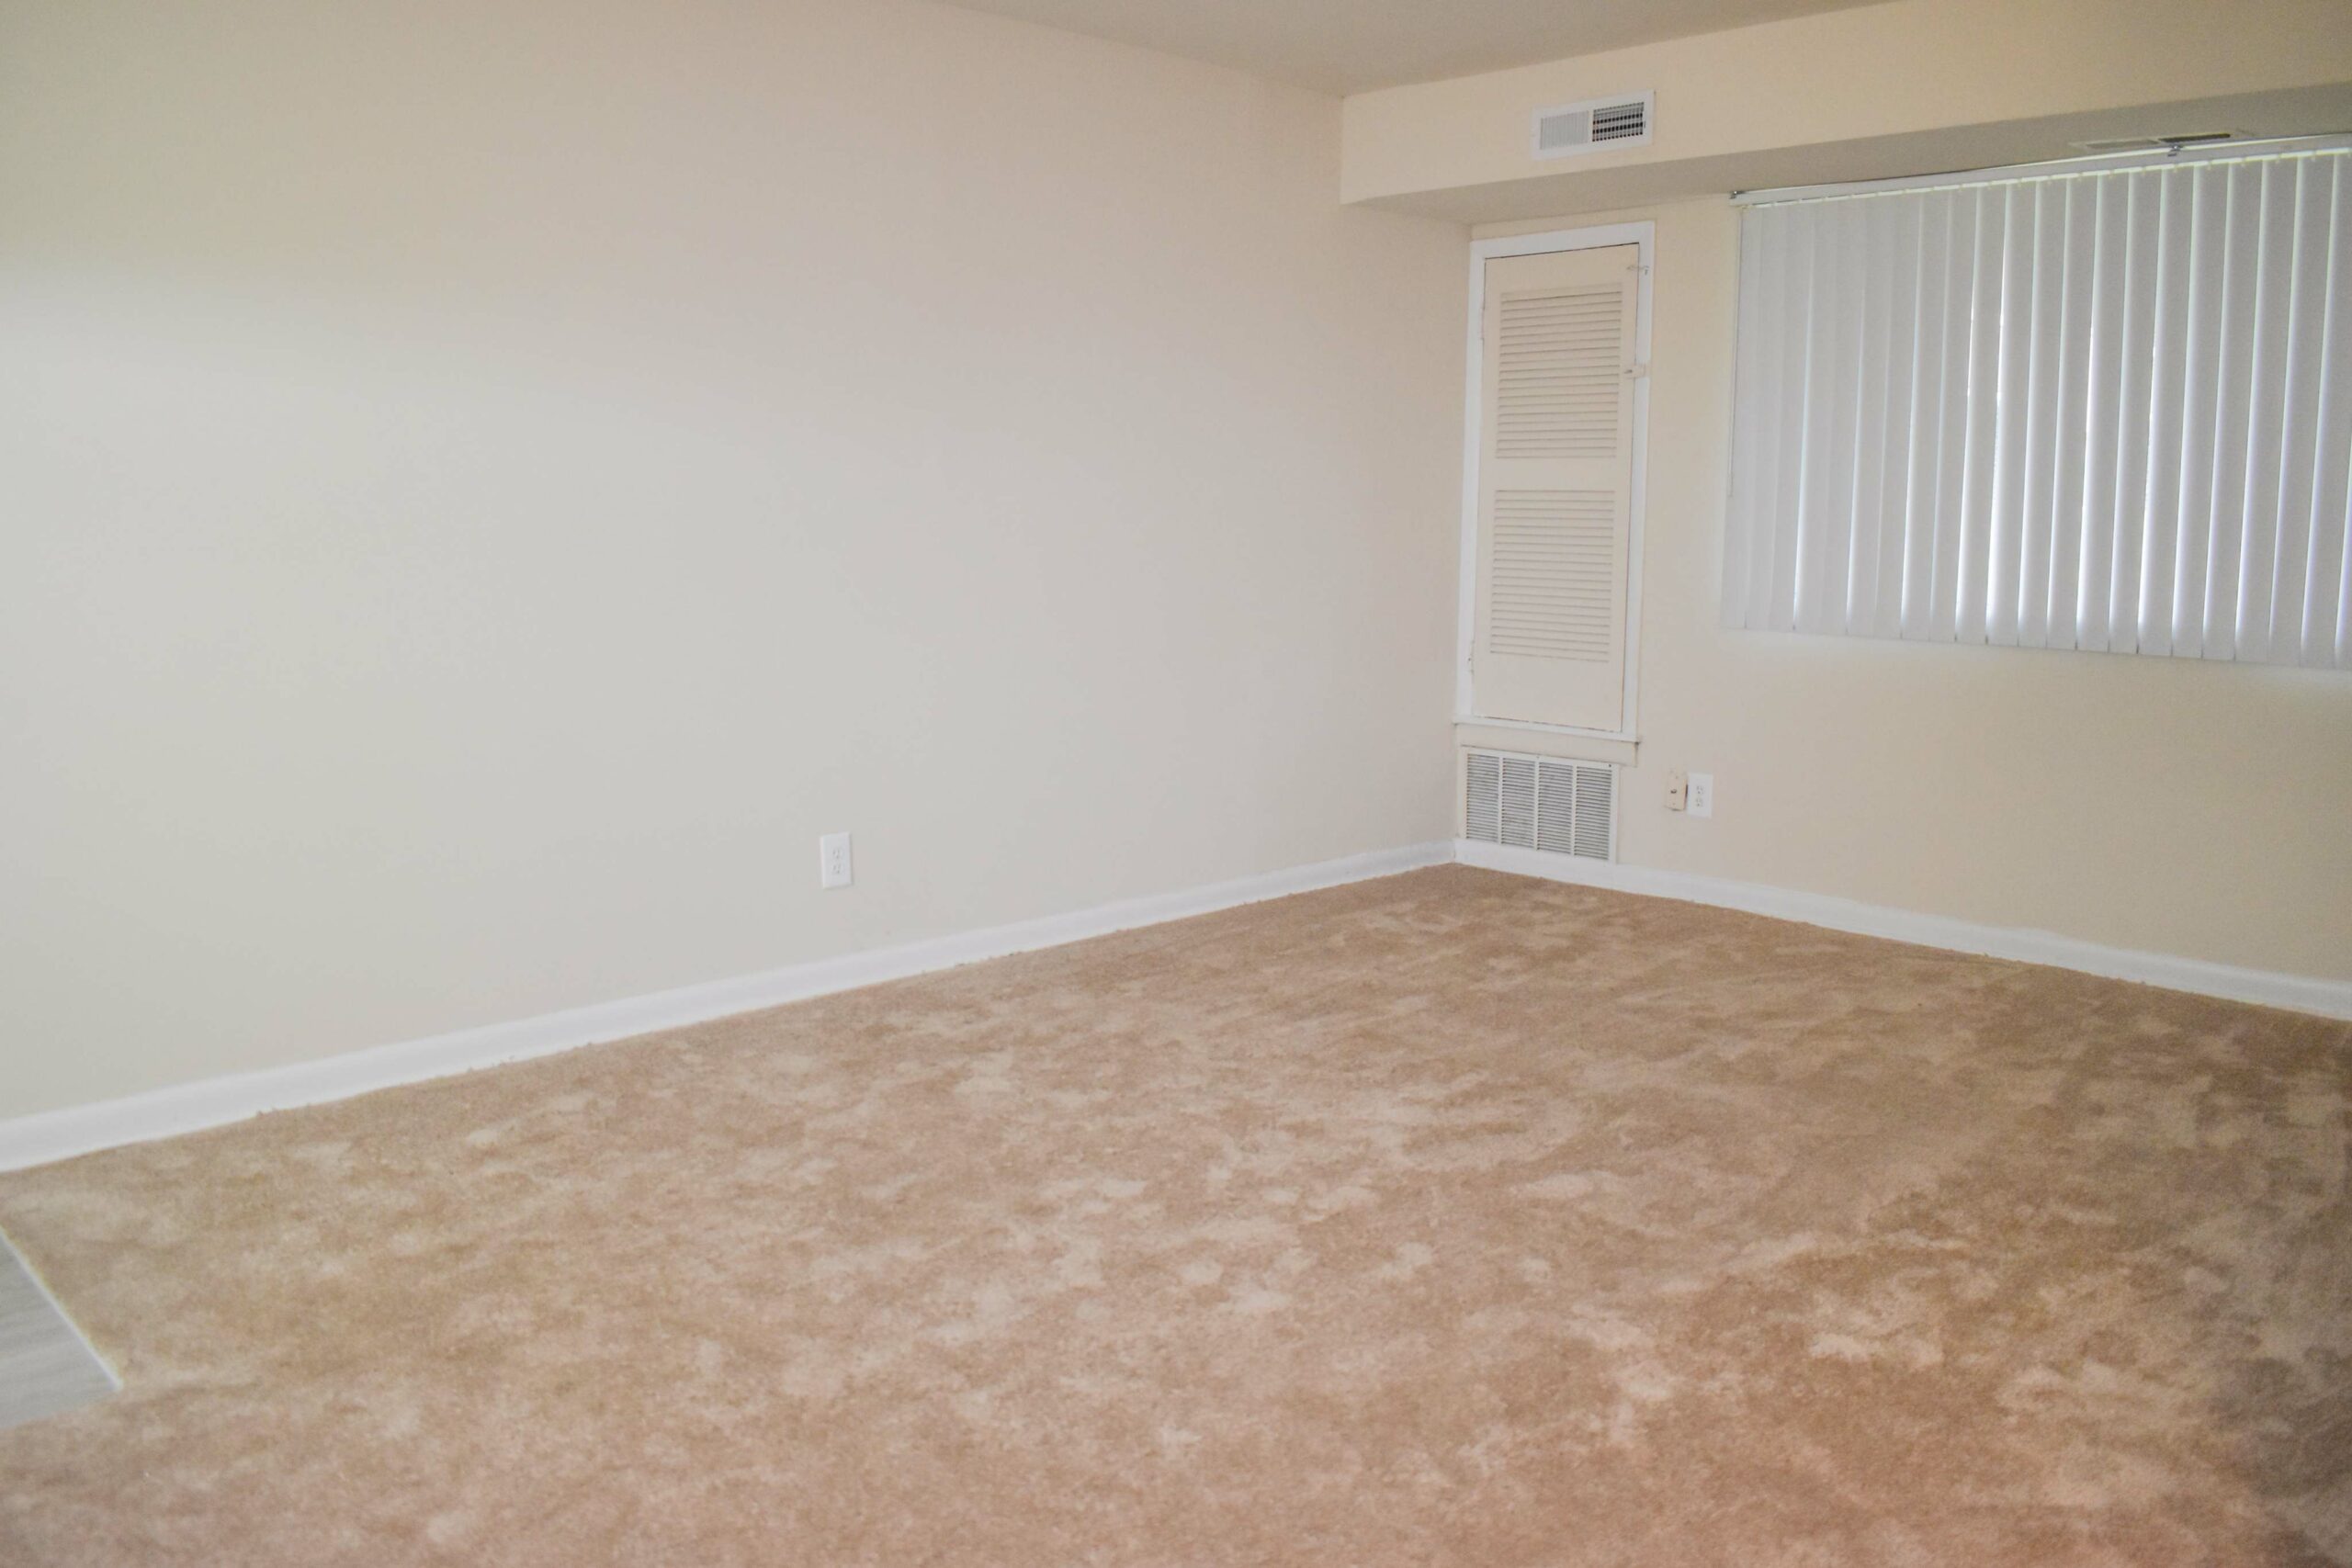 Living room area of an apartment unfurnished, fitted with carpet flooring, a ceiling fan, and a huge window